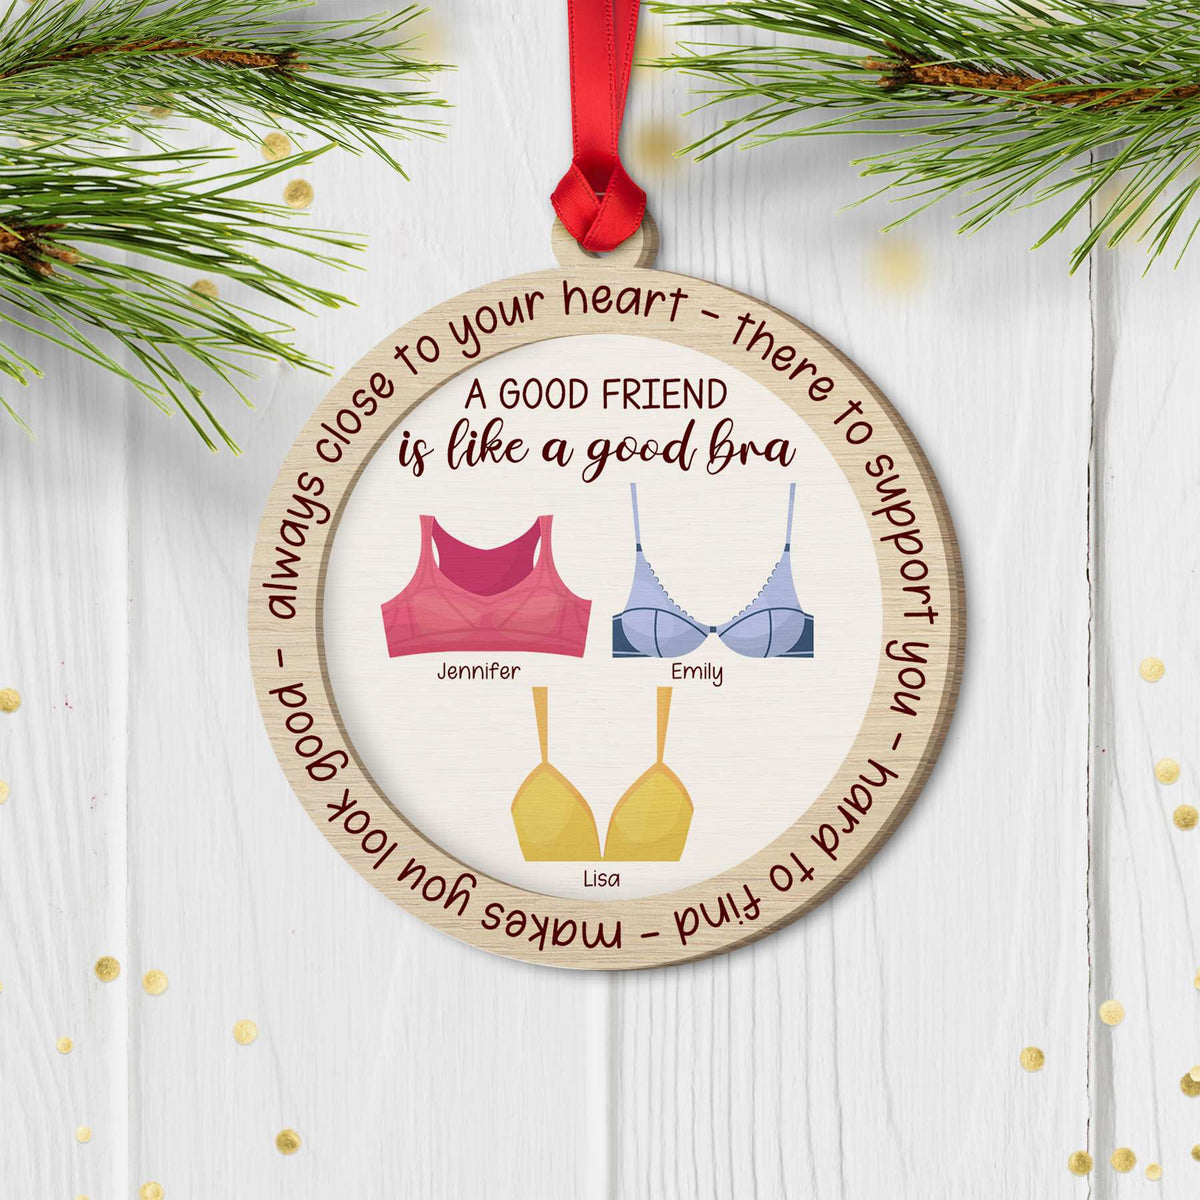 A Good Friend Is Like A Good Bra - Personalized 2 Layers Wooden